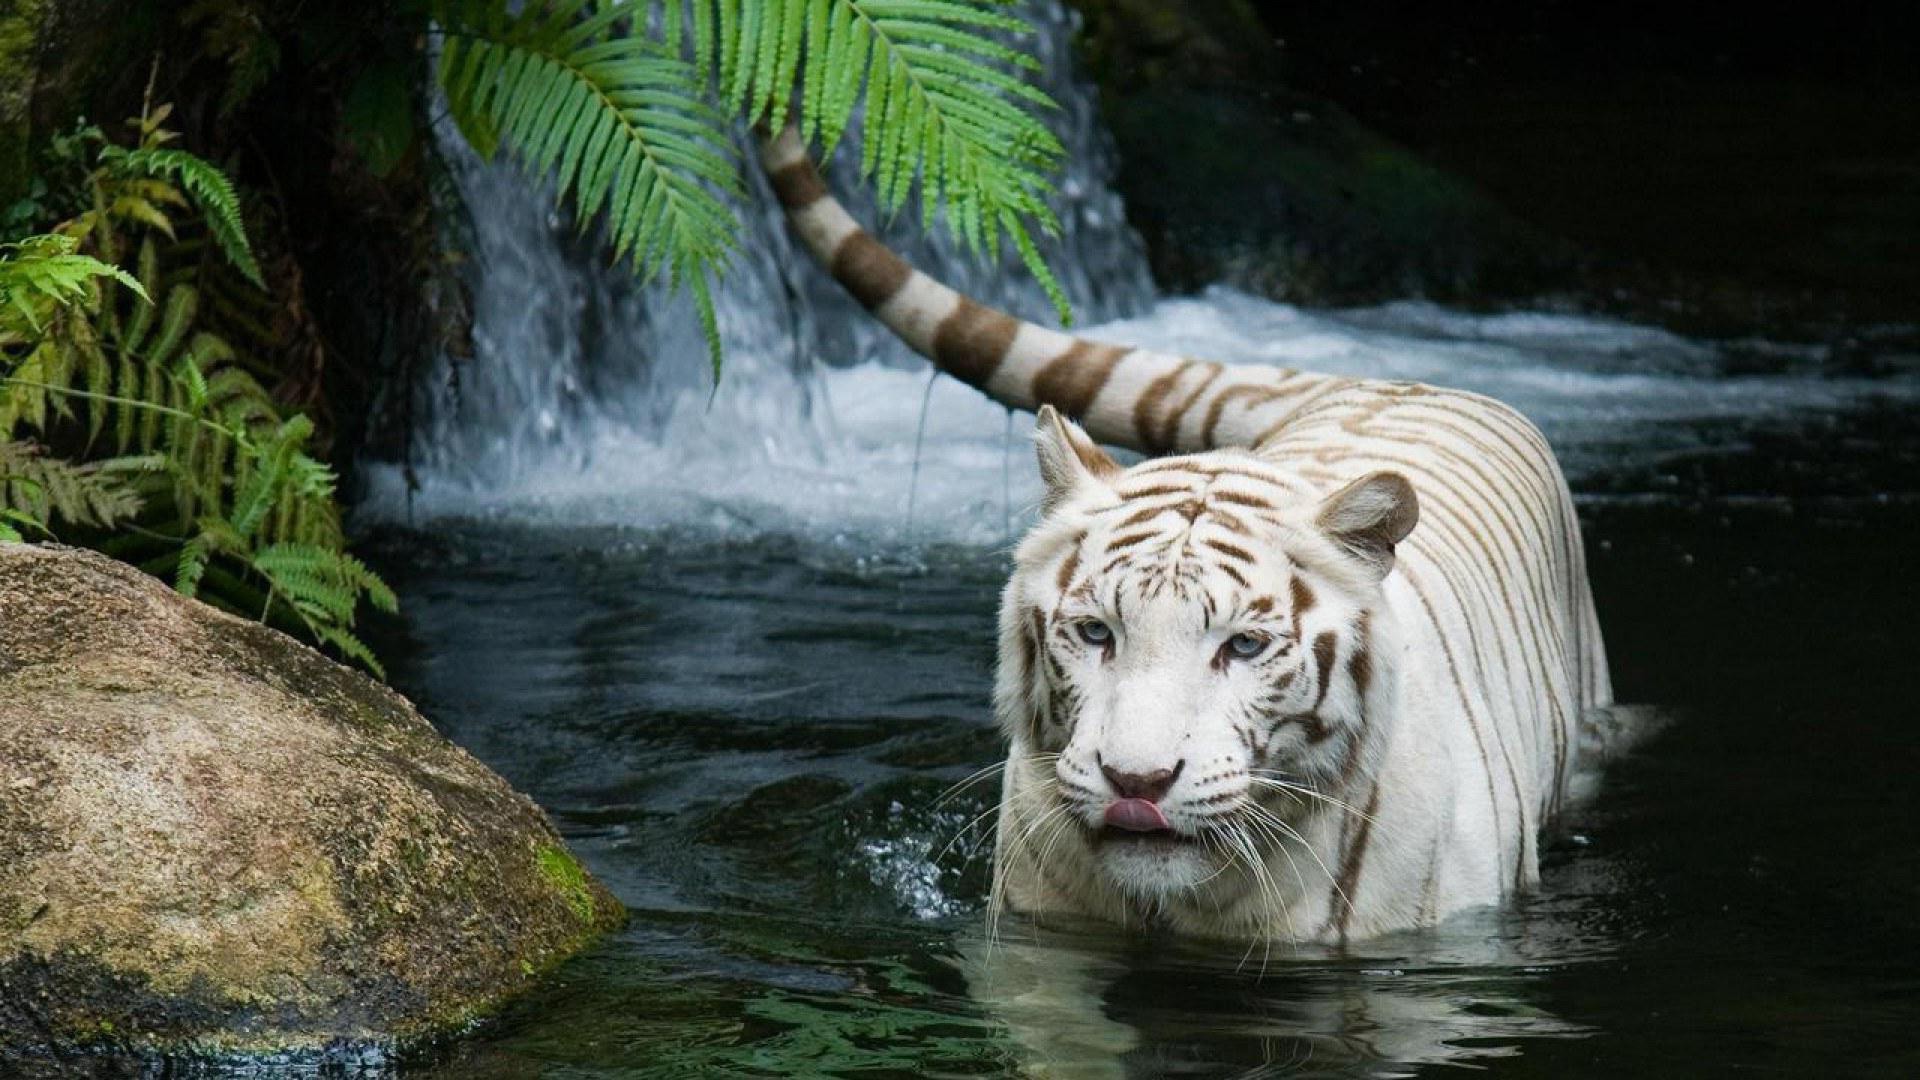 Desktop hd wallpapers of white tigers 3d hd pictures.